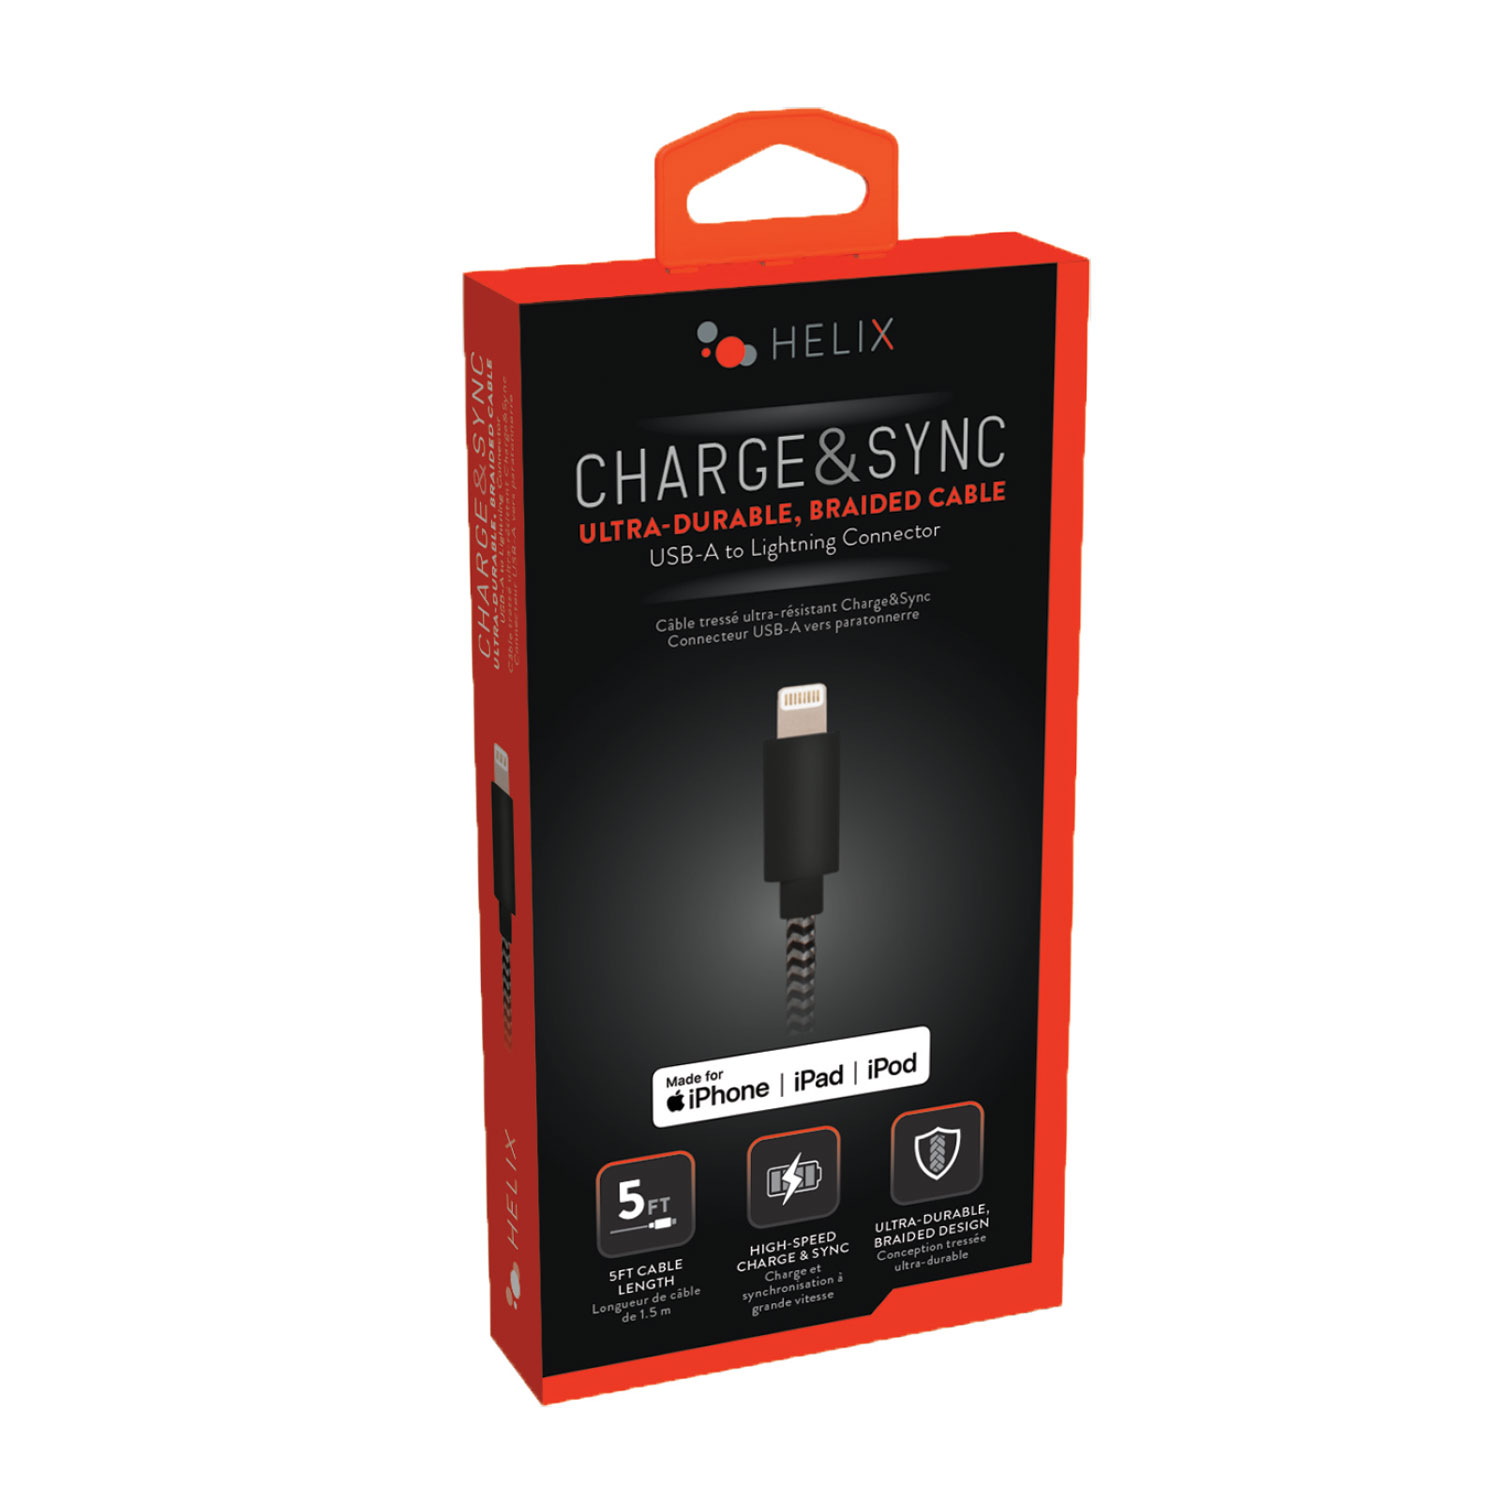 Helix 1.5m (5 ft.) USB A/Lightning Cable - Black